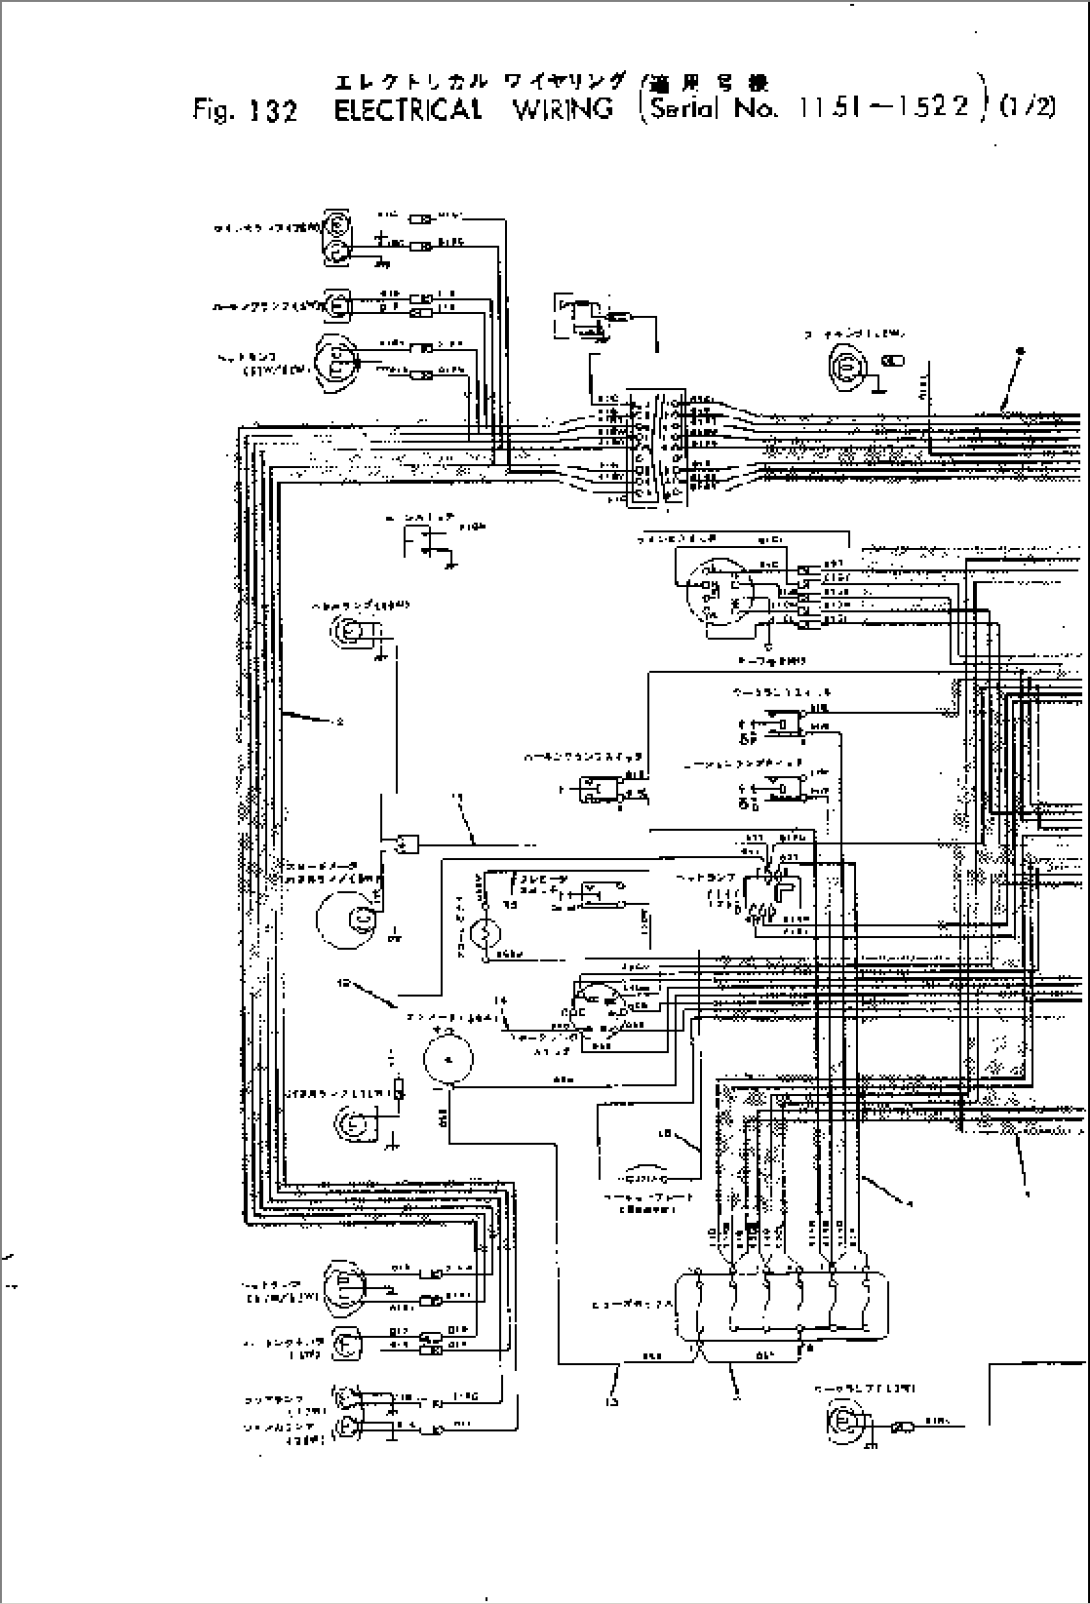 ELECTRICAL WIRING (1/2)(#1151-1522)